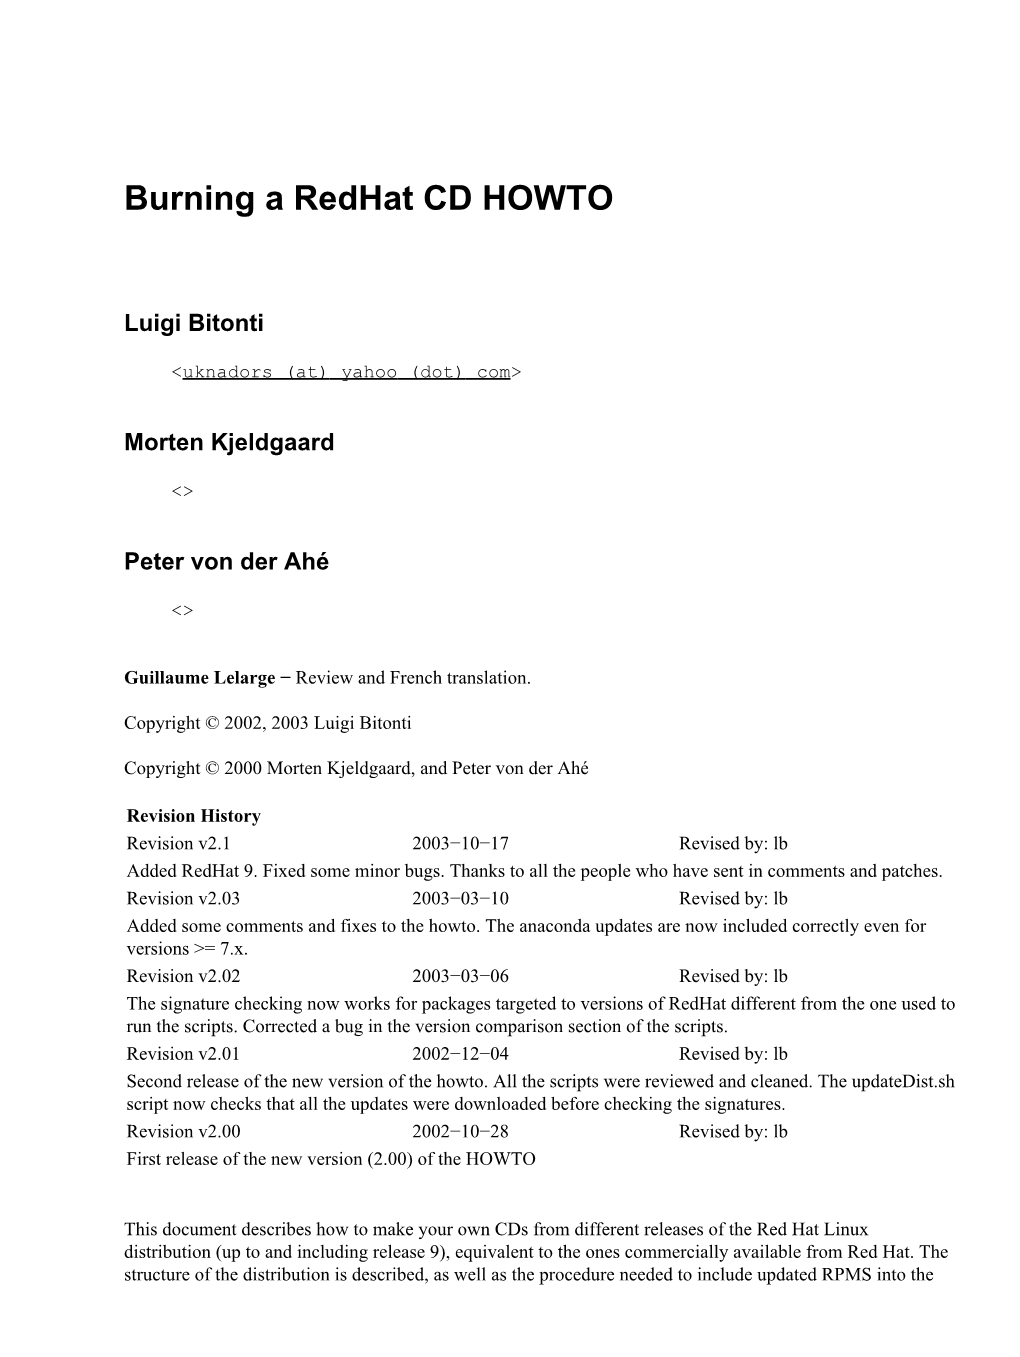 Burning a Redhat CD HOWTO